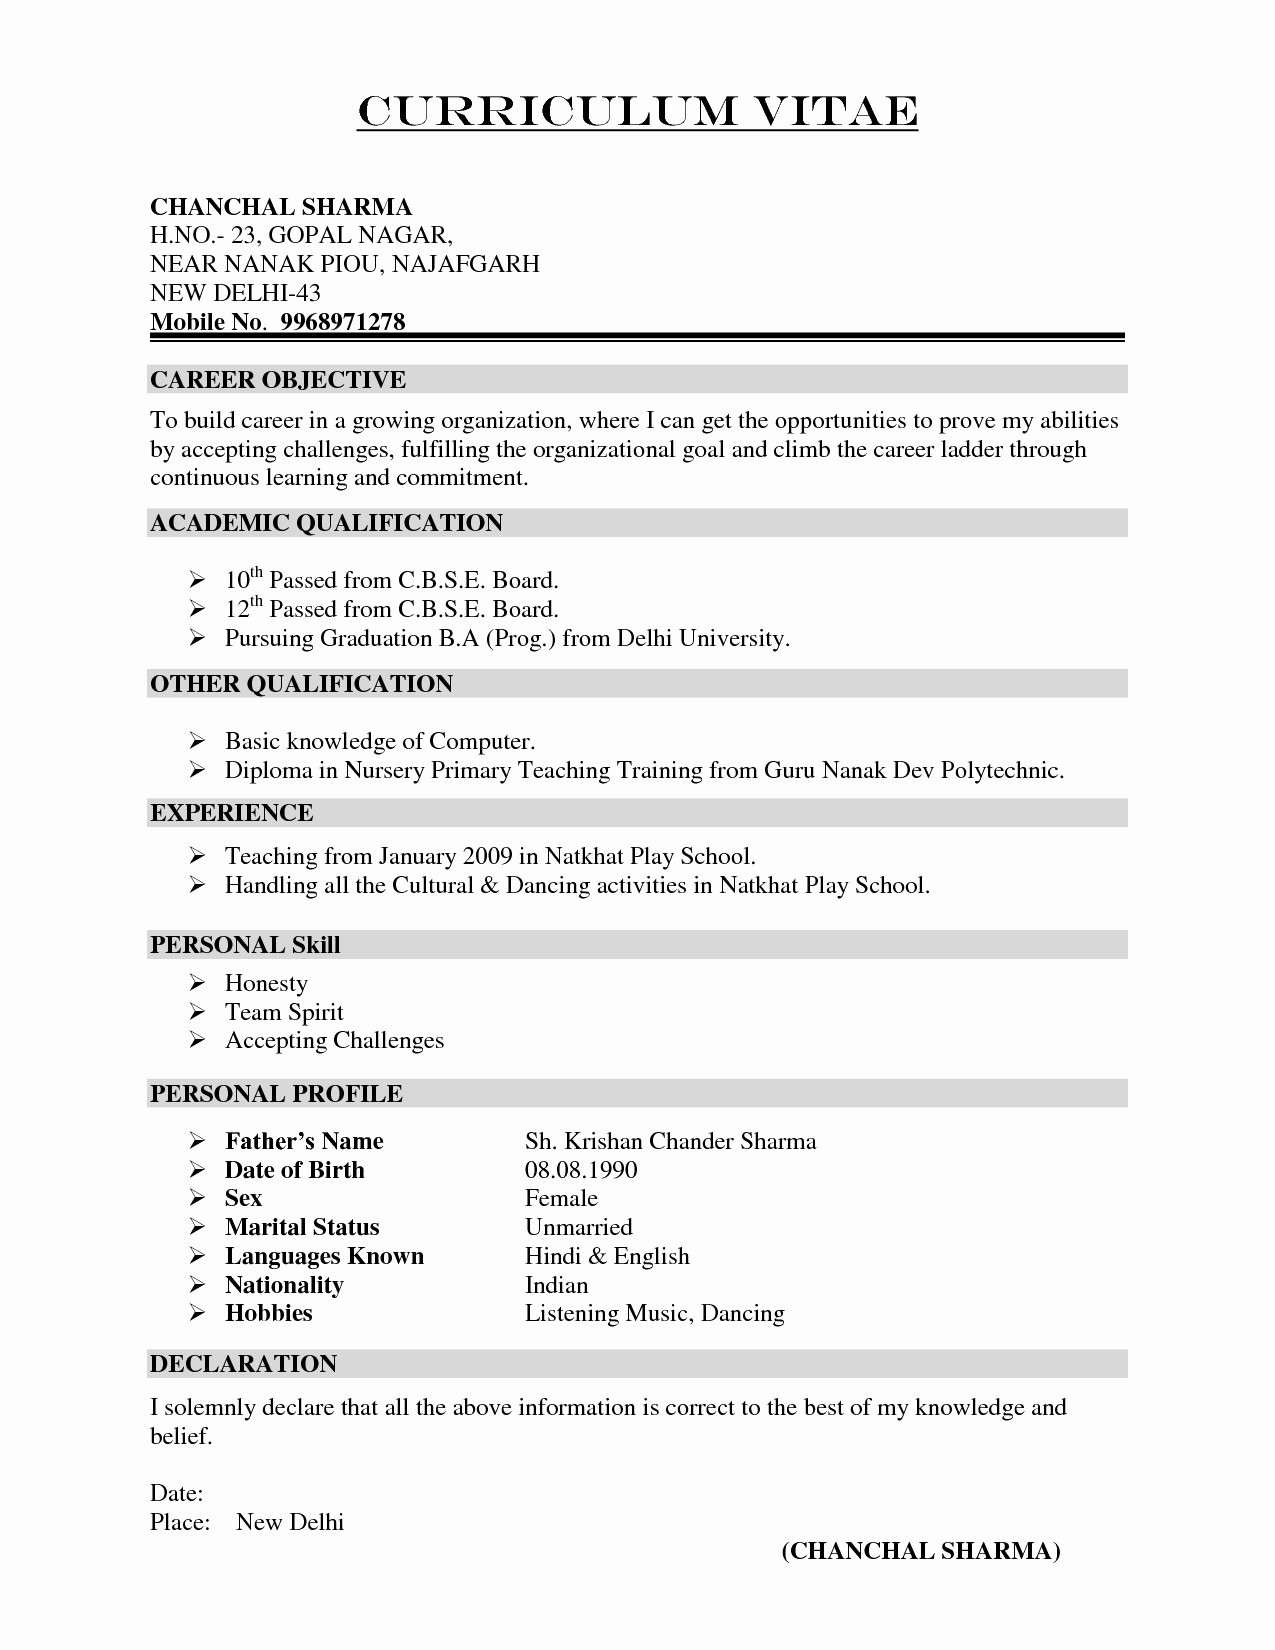 Quick Cover Letter Template - Simple Sample Cover Letter for Job Application Refrence New Resume